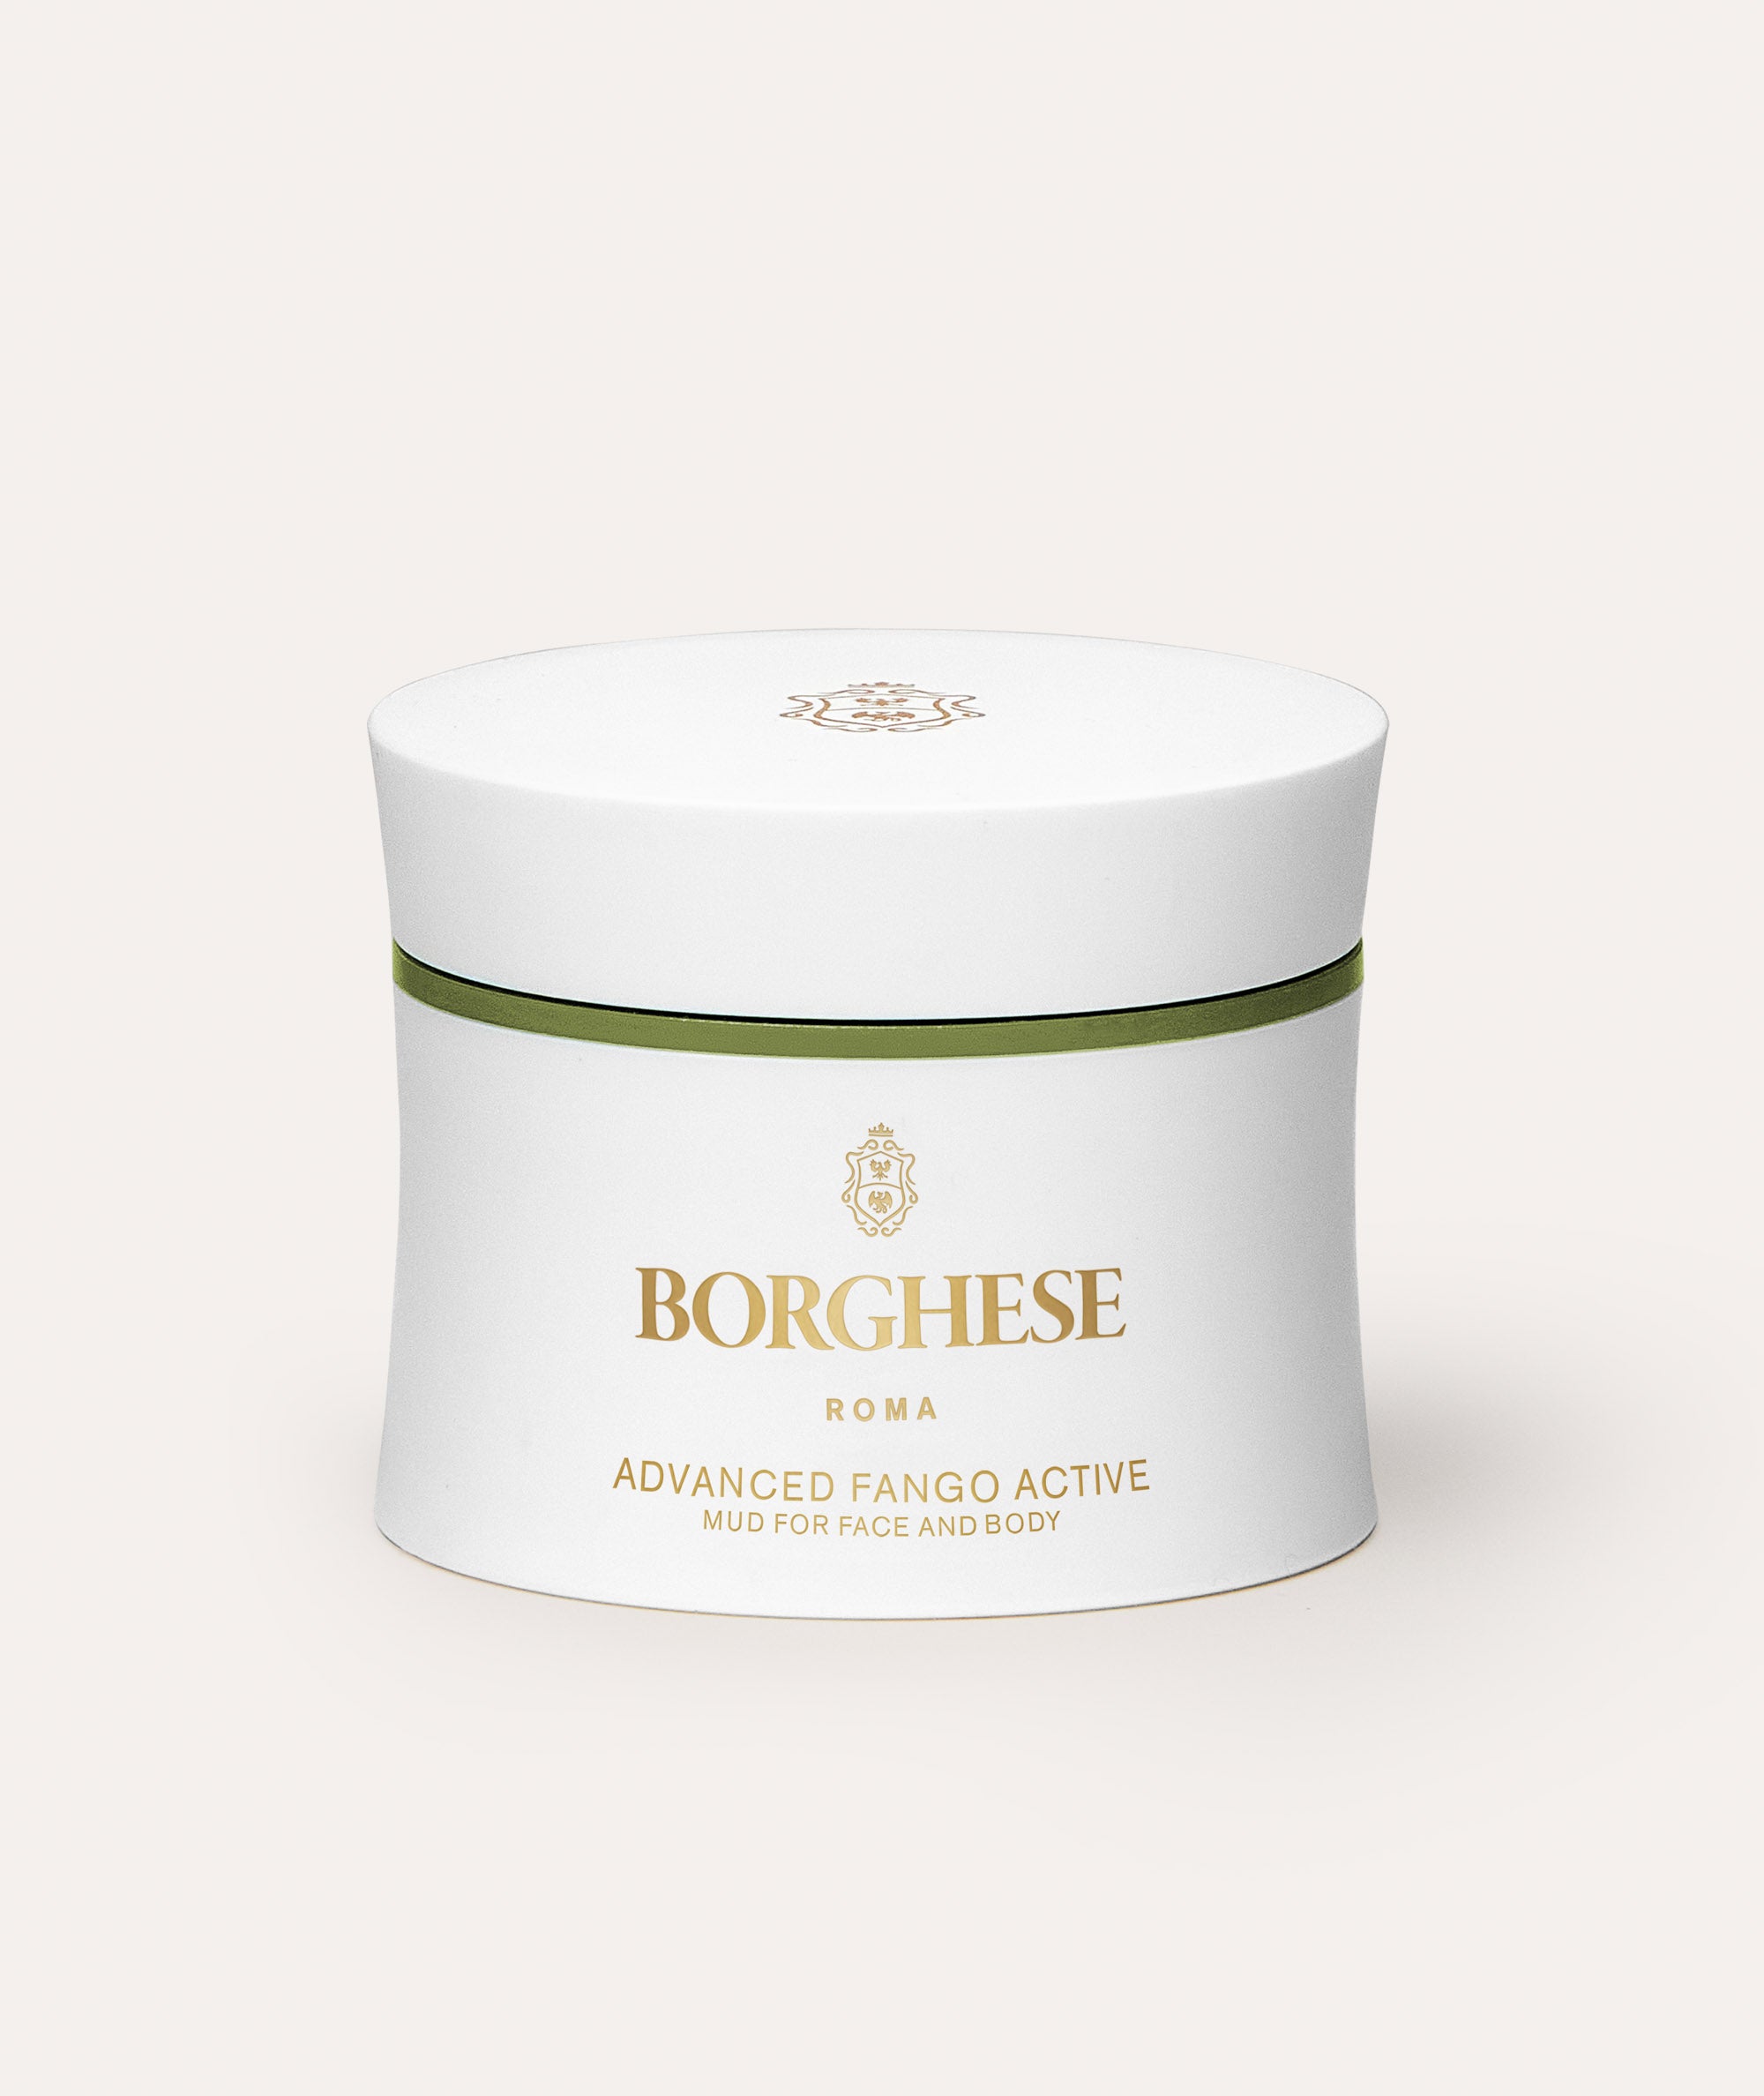 This is a picture of the Borghese Advanced Fango Active Purifying Mud Mask in a 2.7 oz jar